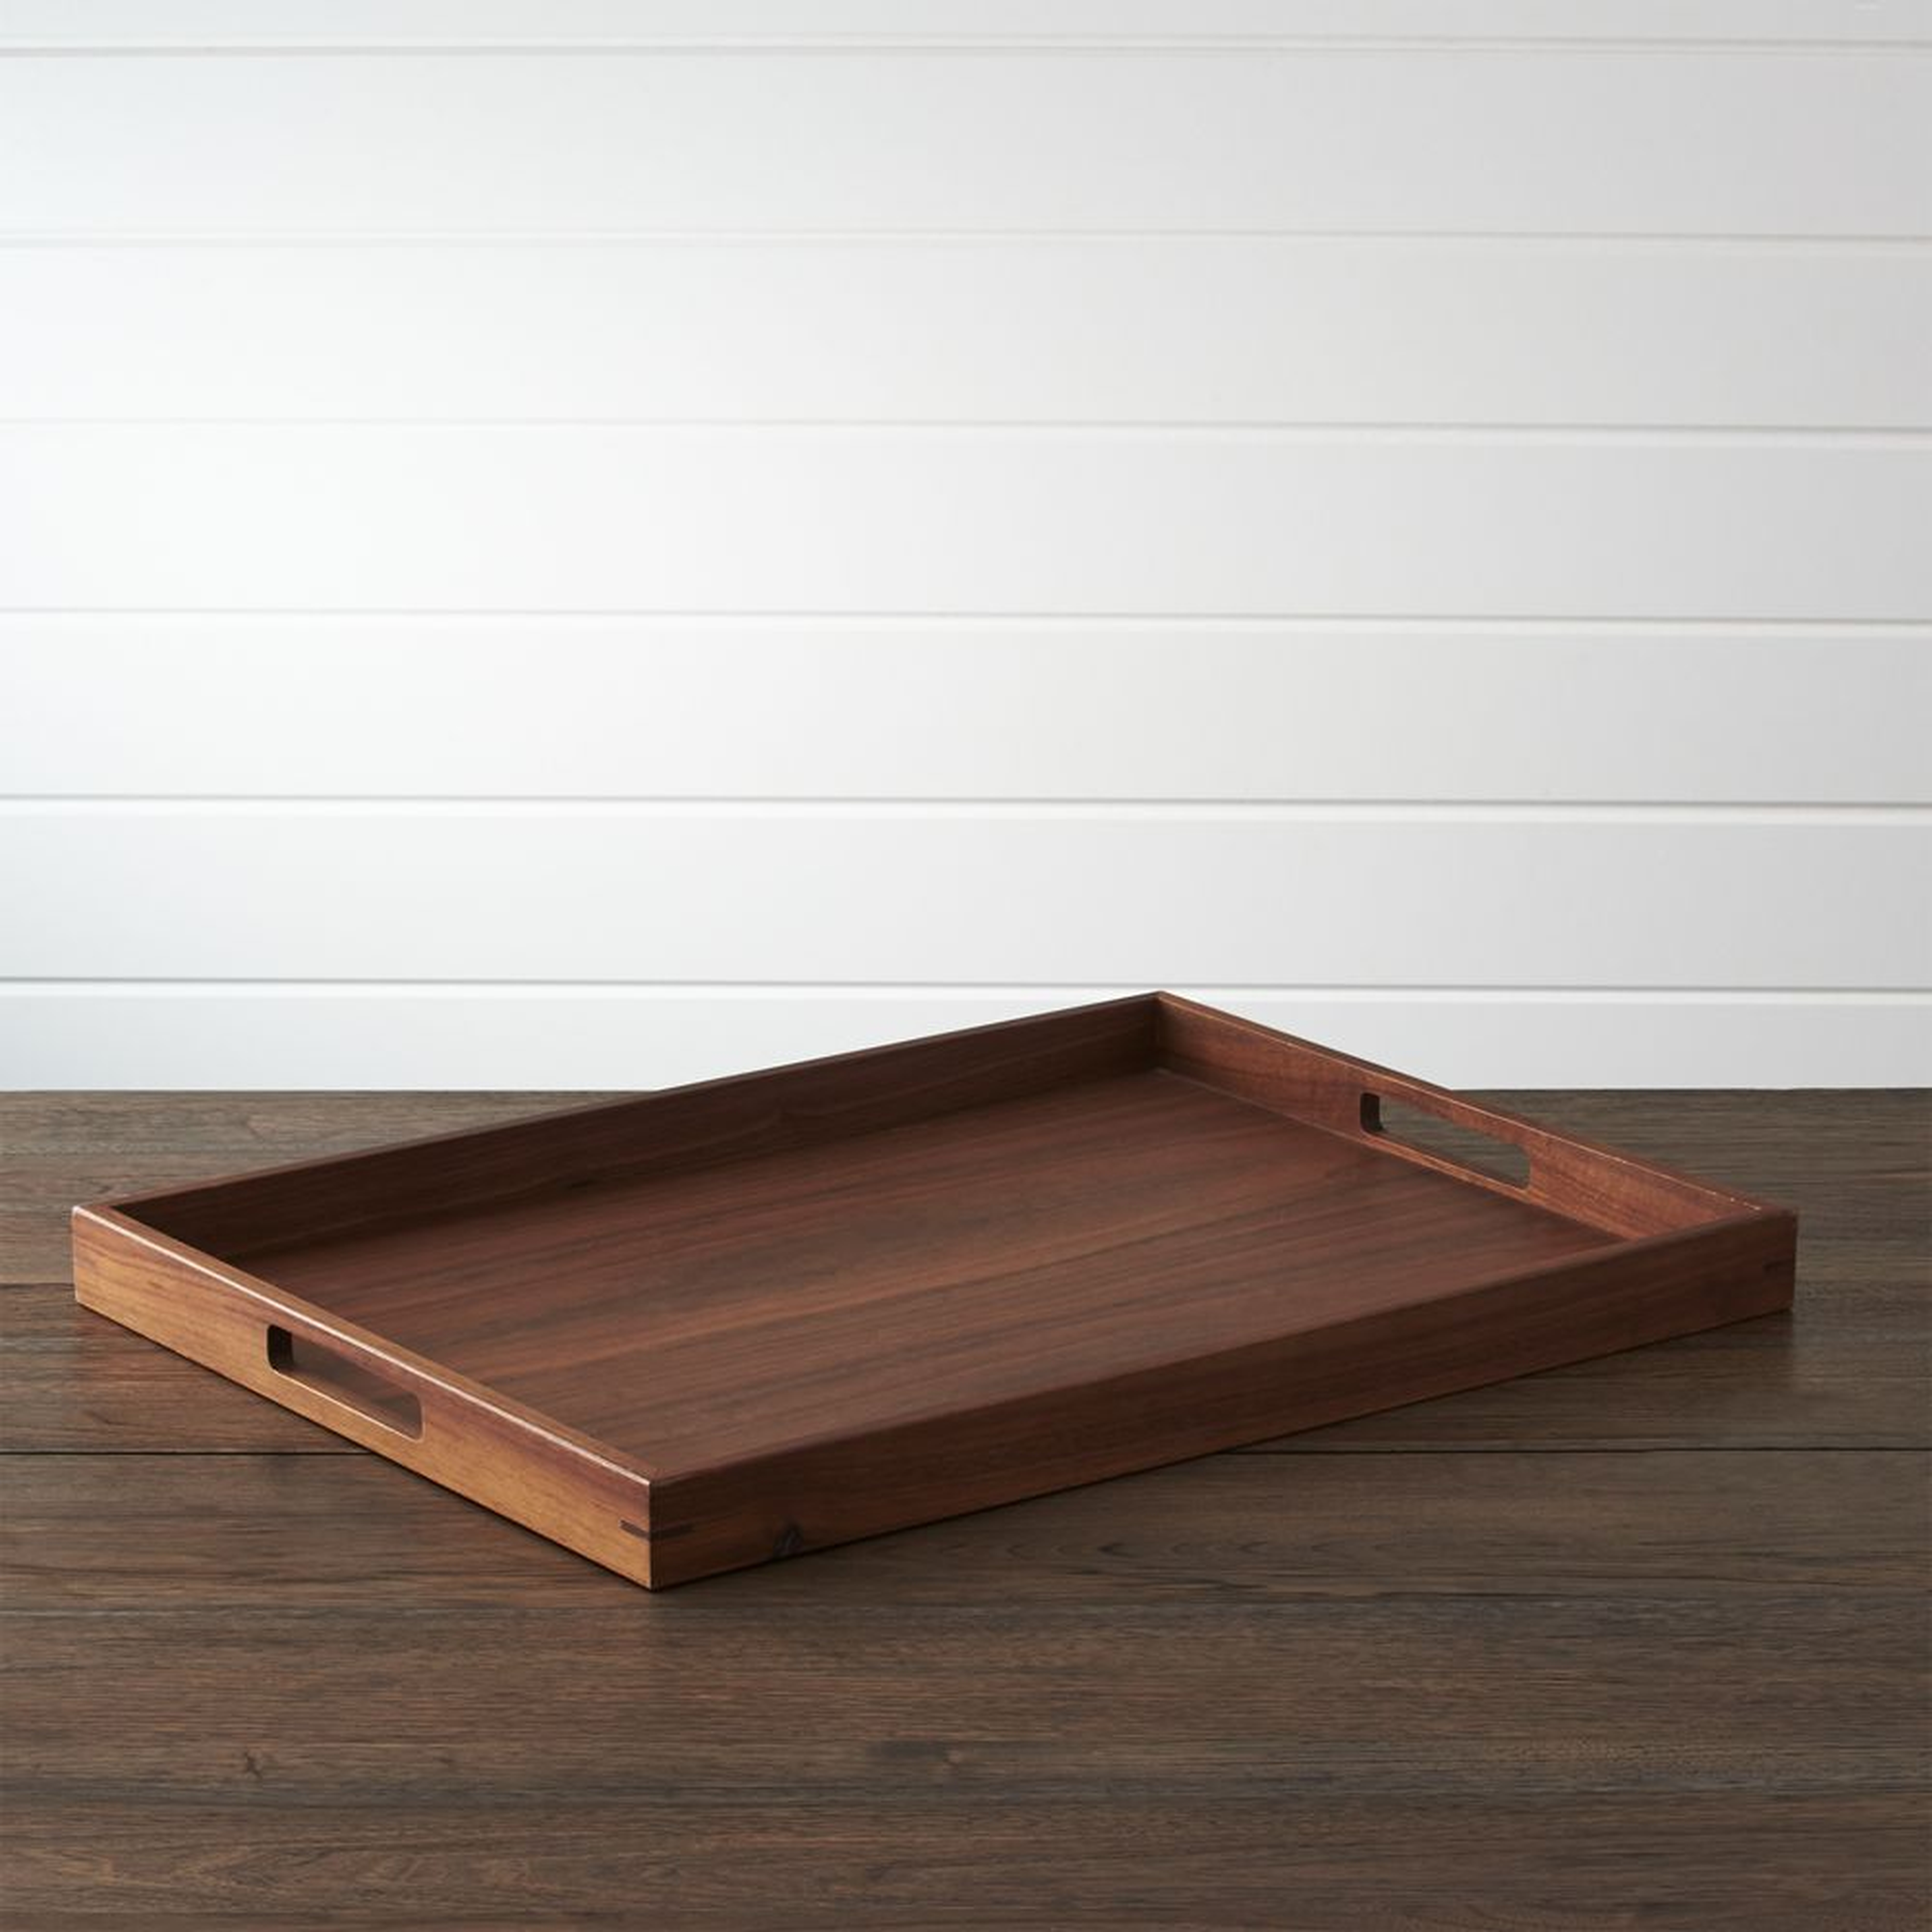 Willoughby Large Tray - Crate and Barrel